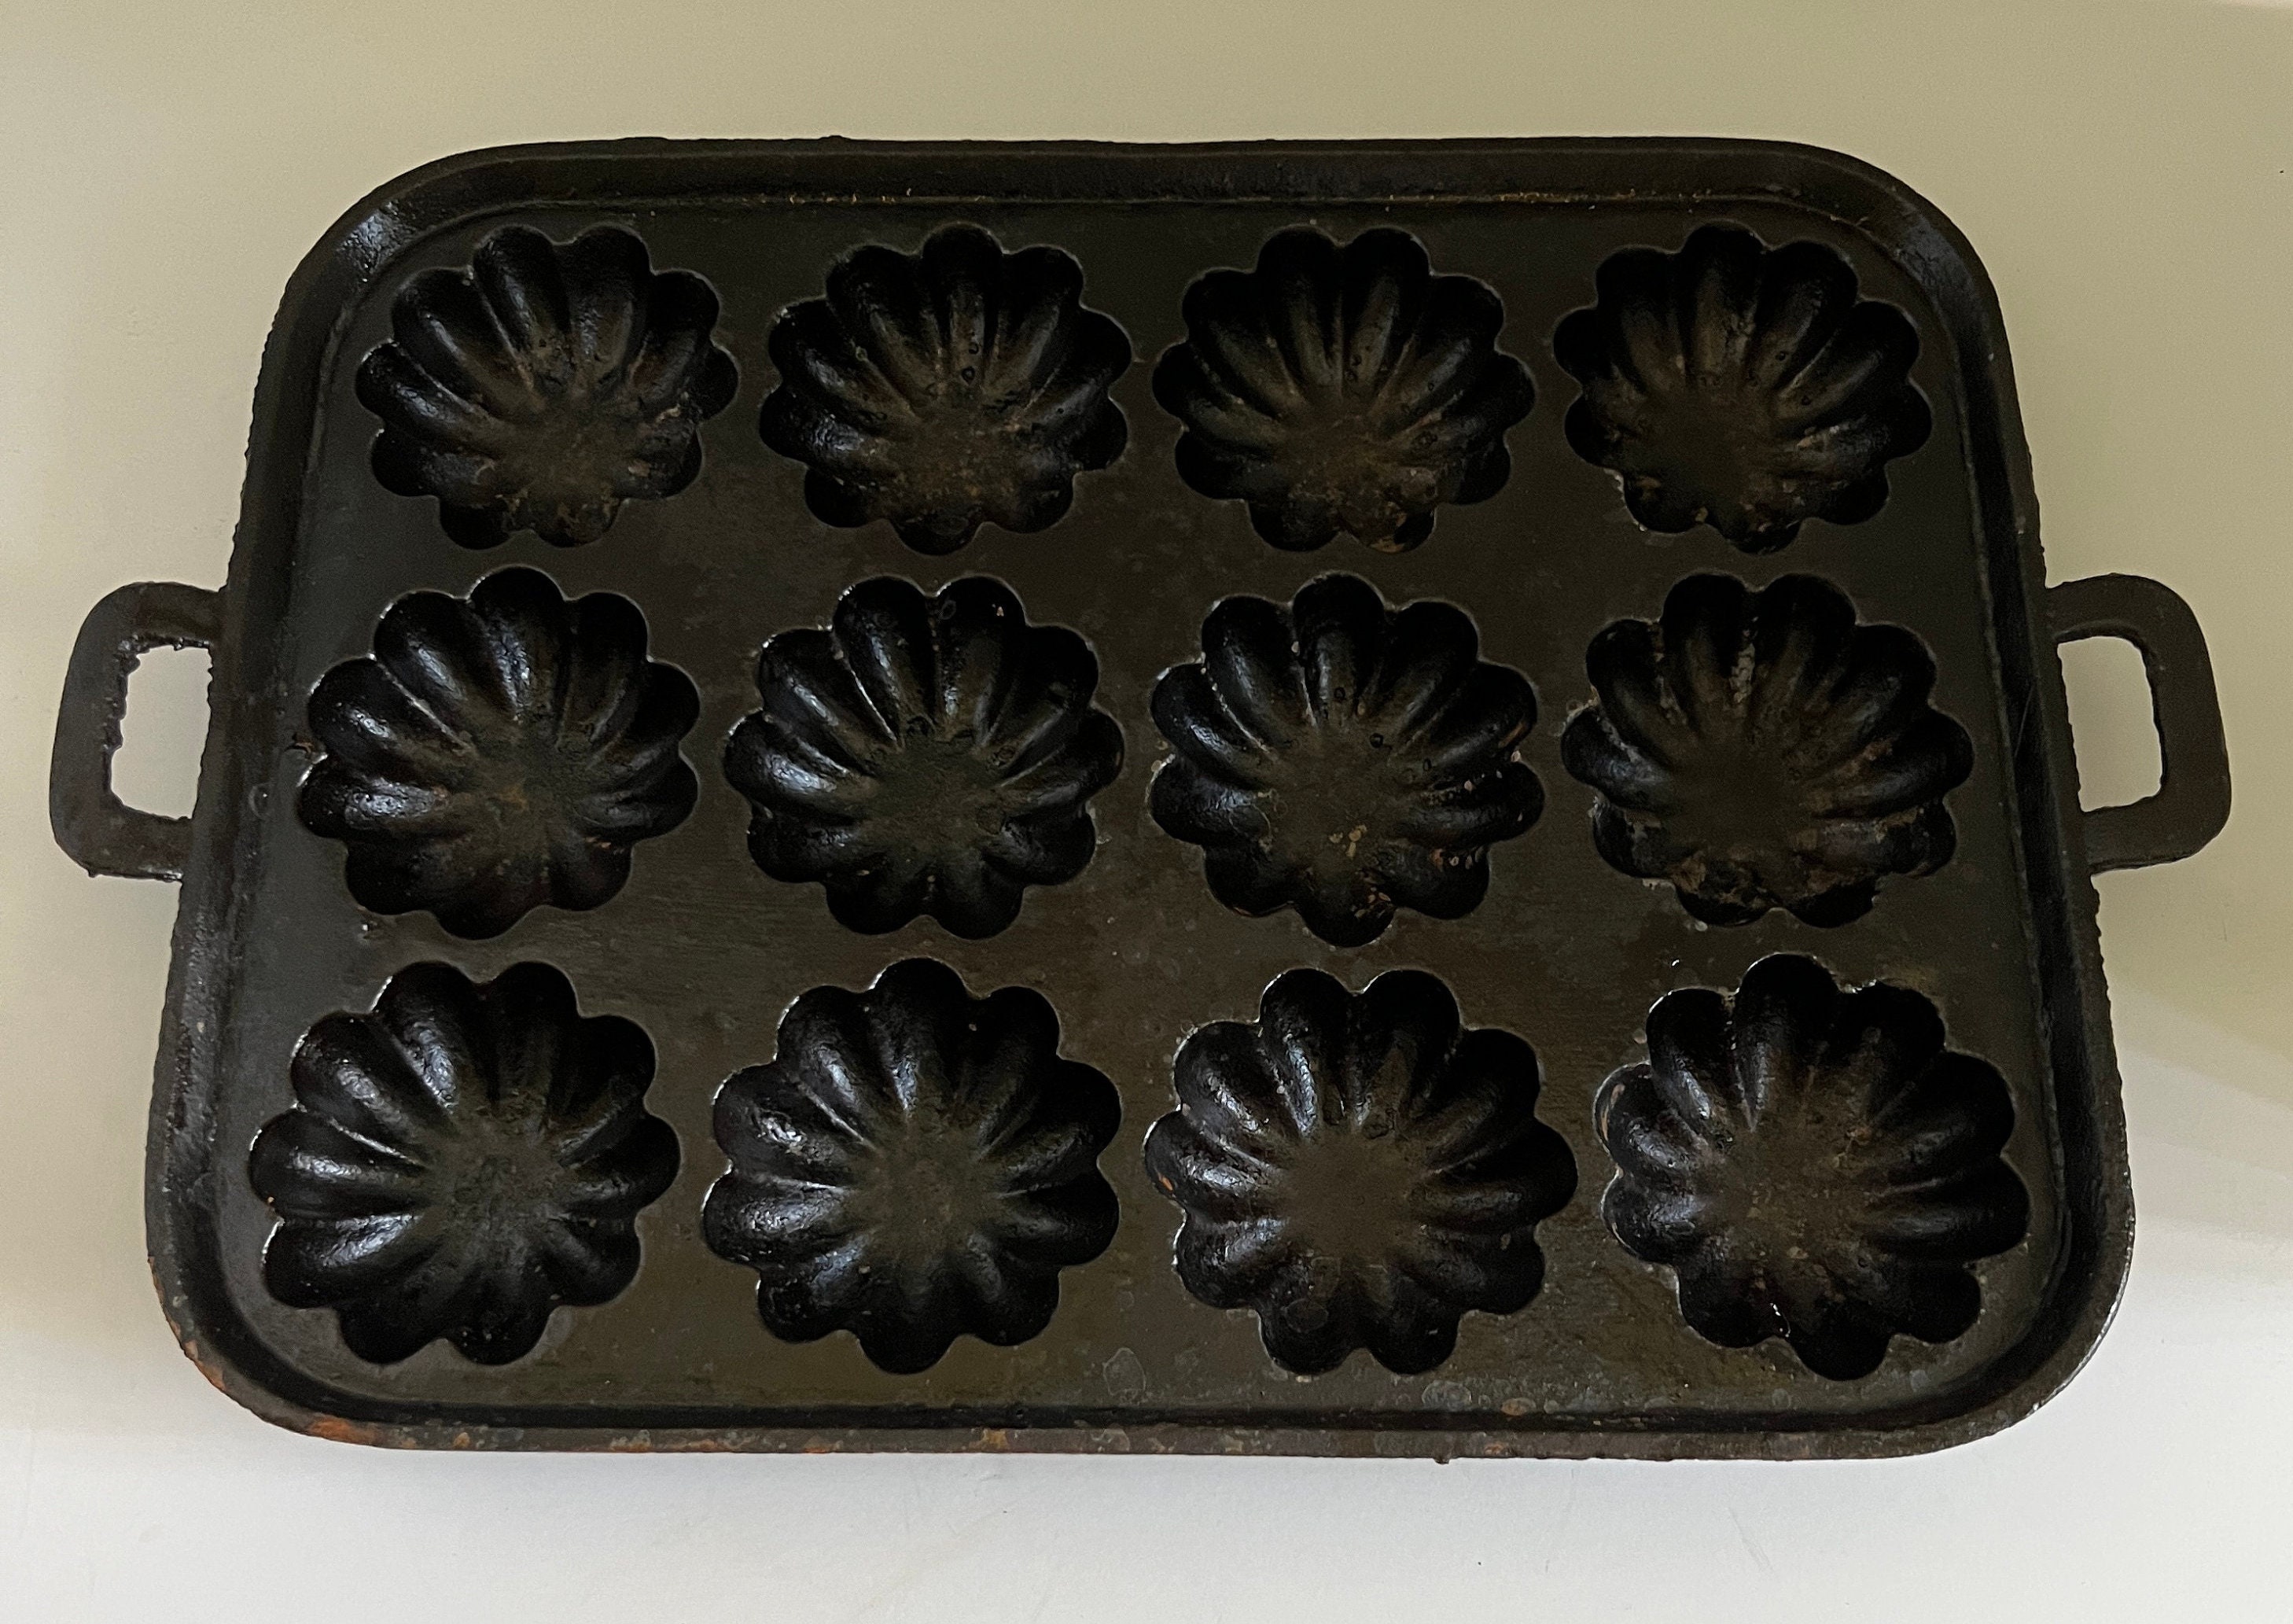 A recent restoration - unmarked Lodge 12-cup turk's cap muffin pan